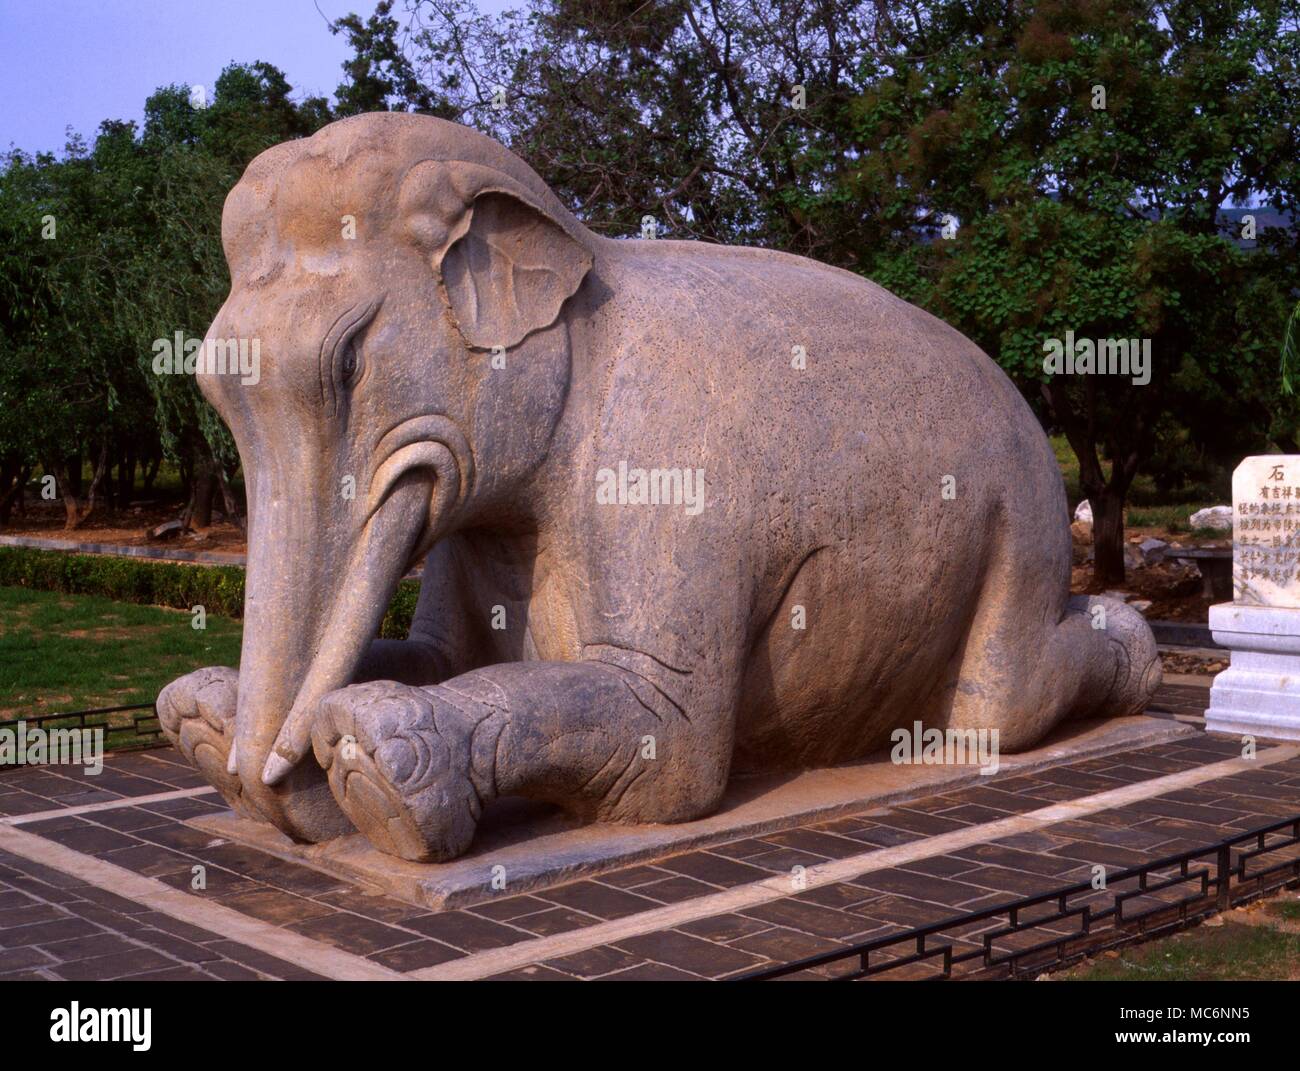 CHINA - ELEPHANT AT THE MING TOMBS Stock Photo